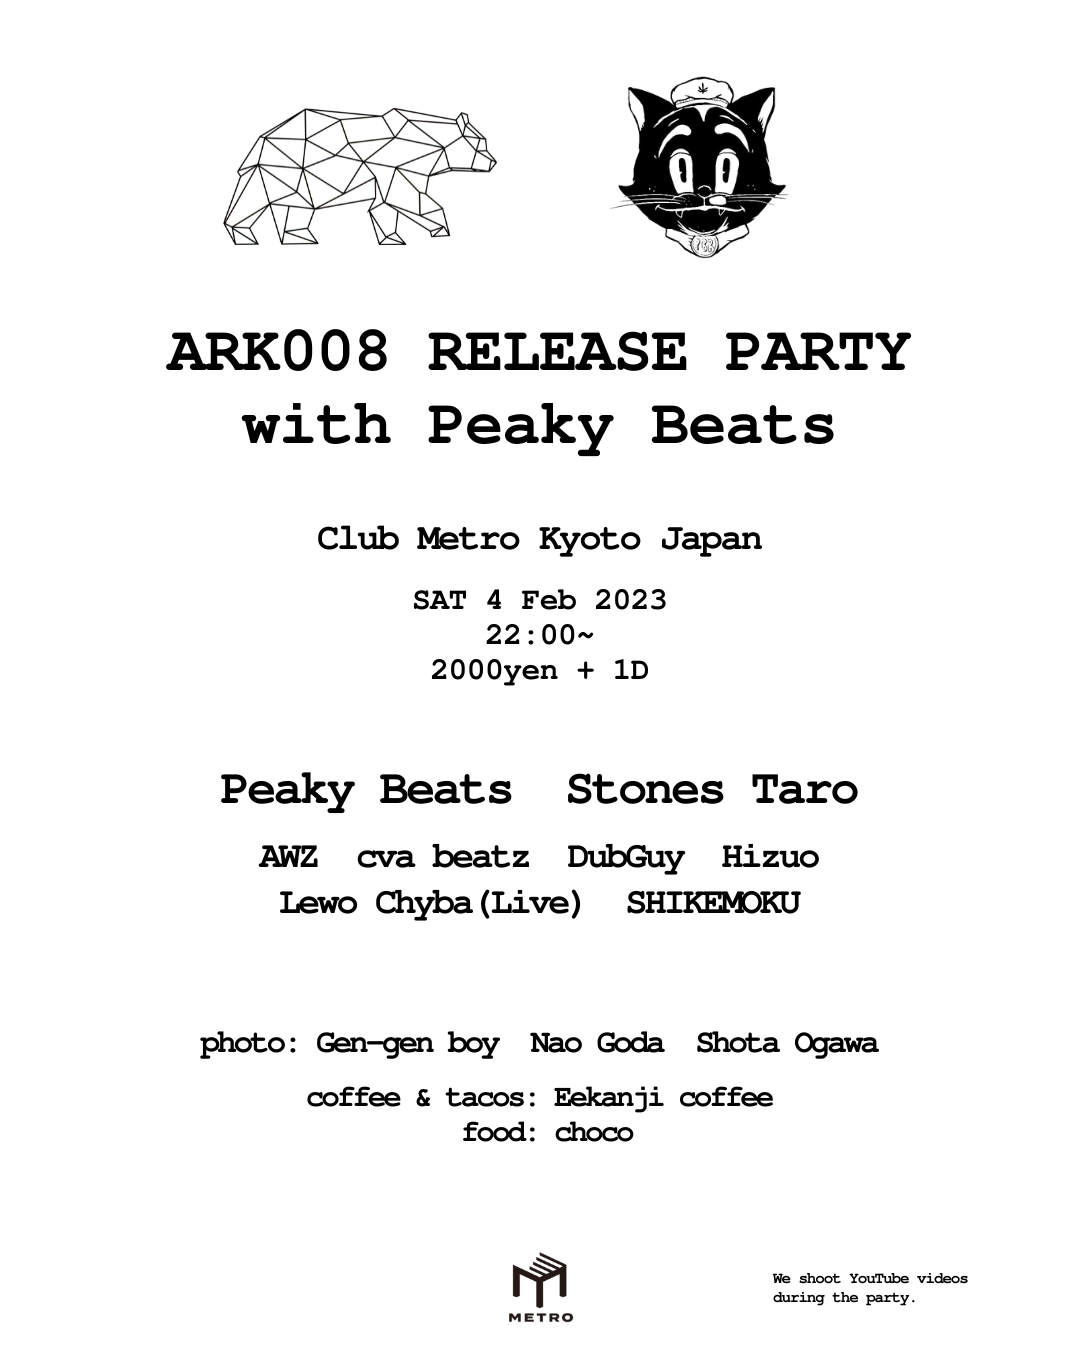 ARK008 Release Party with Peaky Beats - Página frontal